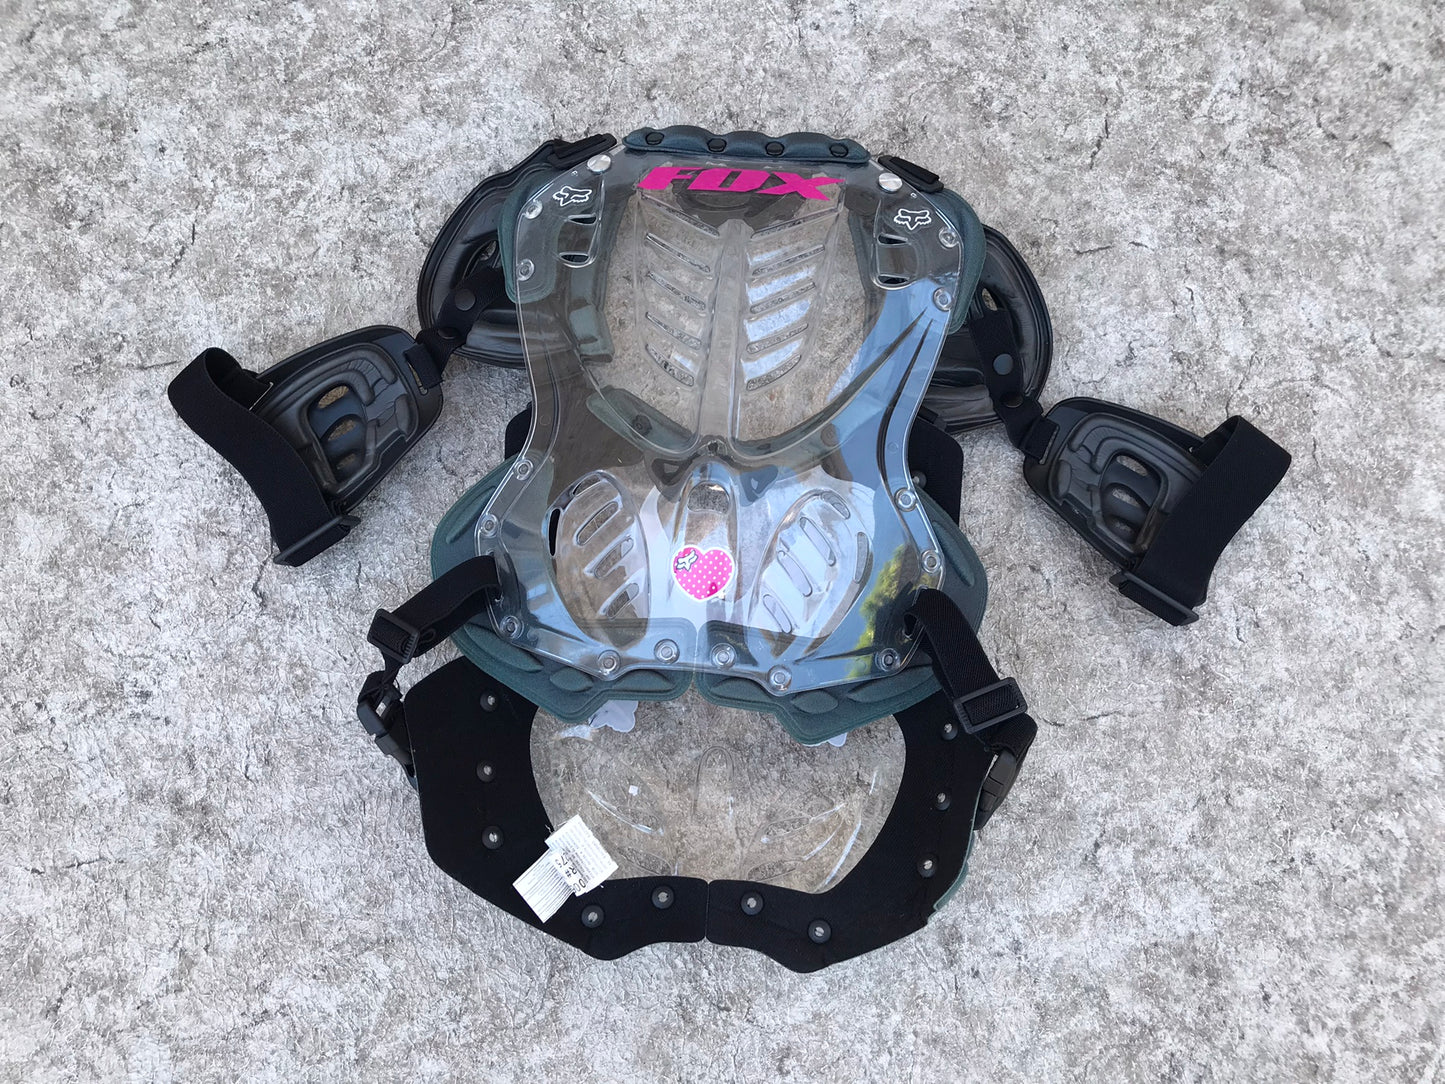 Motocross BMX Dirt Bike Chest Protector Child Size 12 Fox Pink Black Excellent As New